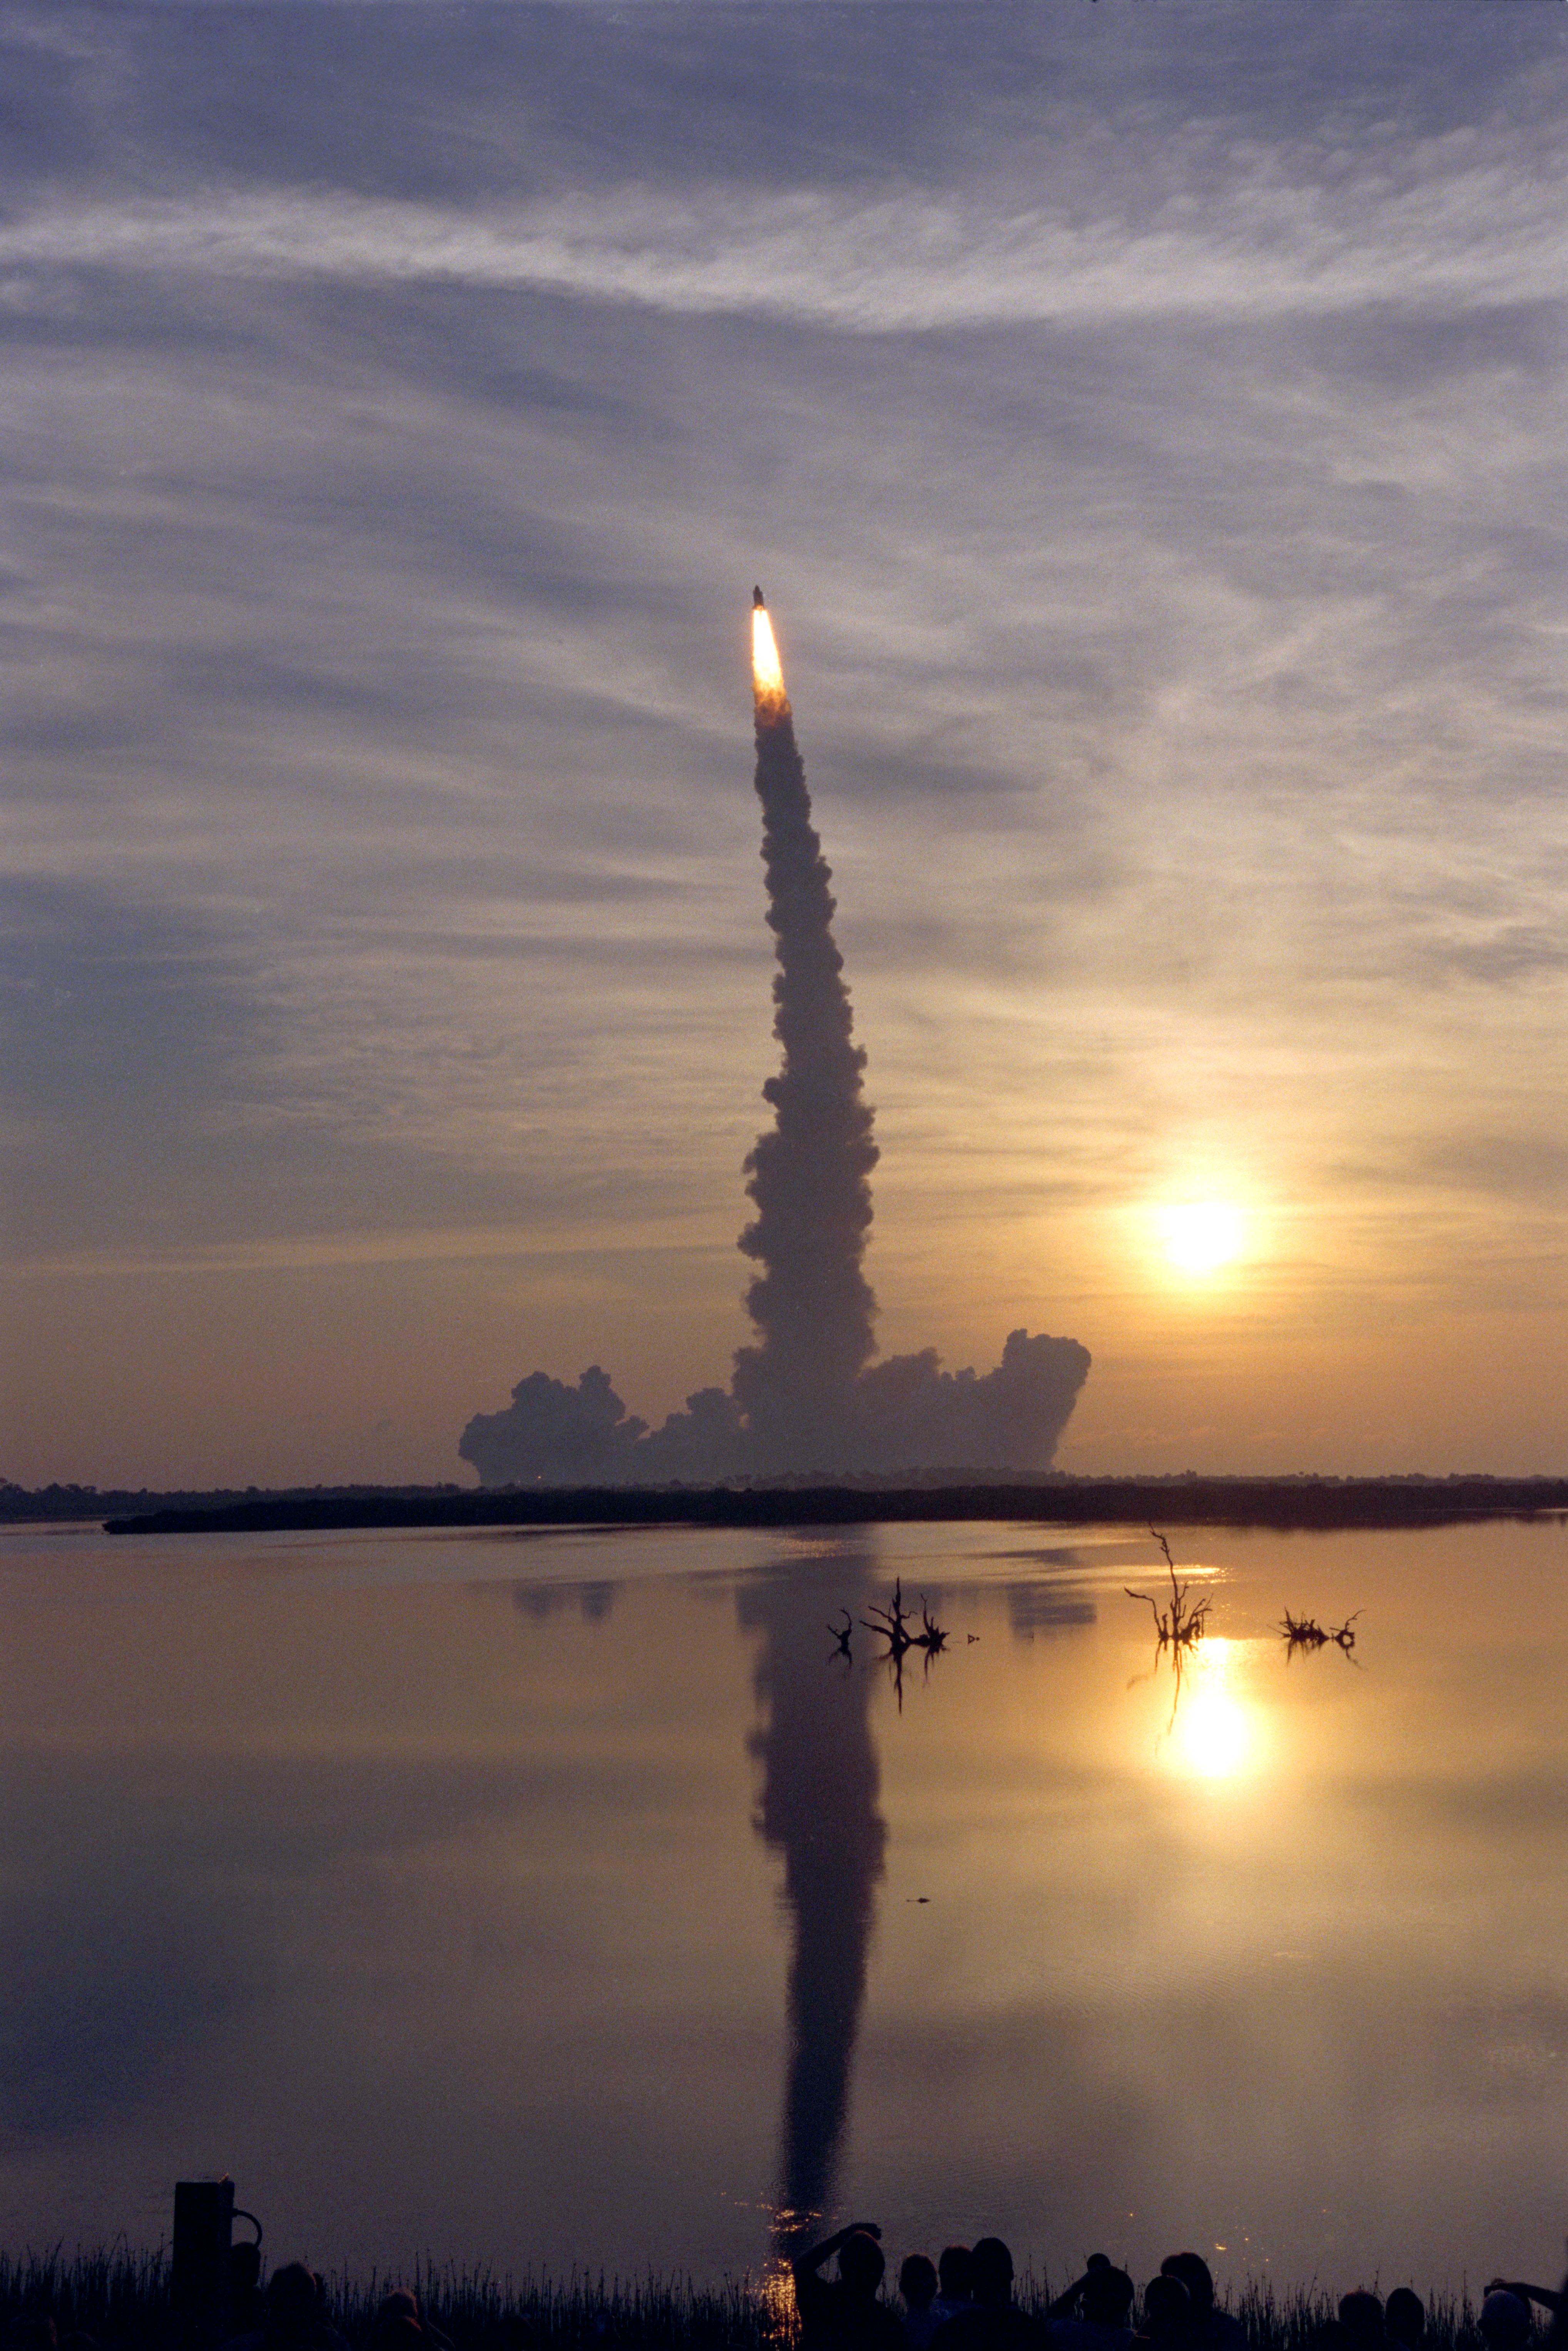 Launch of Discovery on Shuttle mission STS-96.